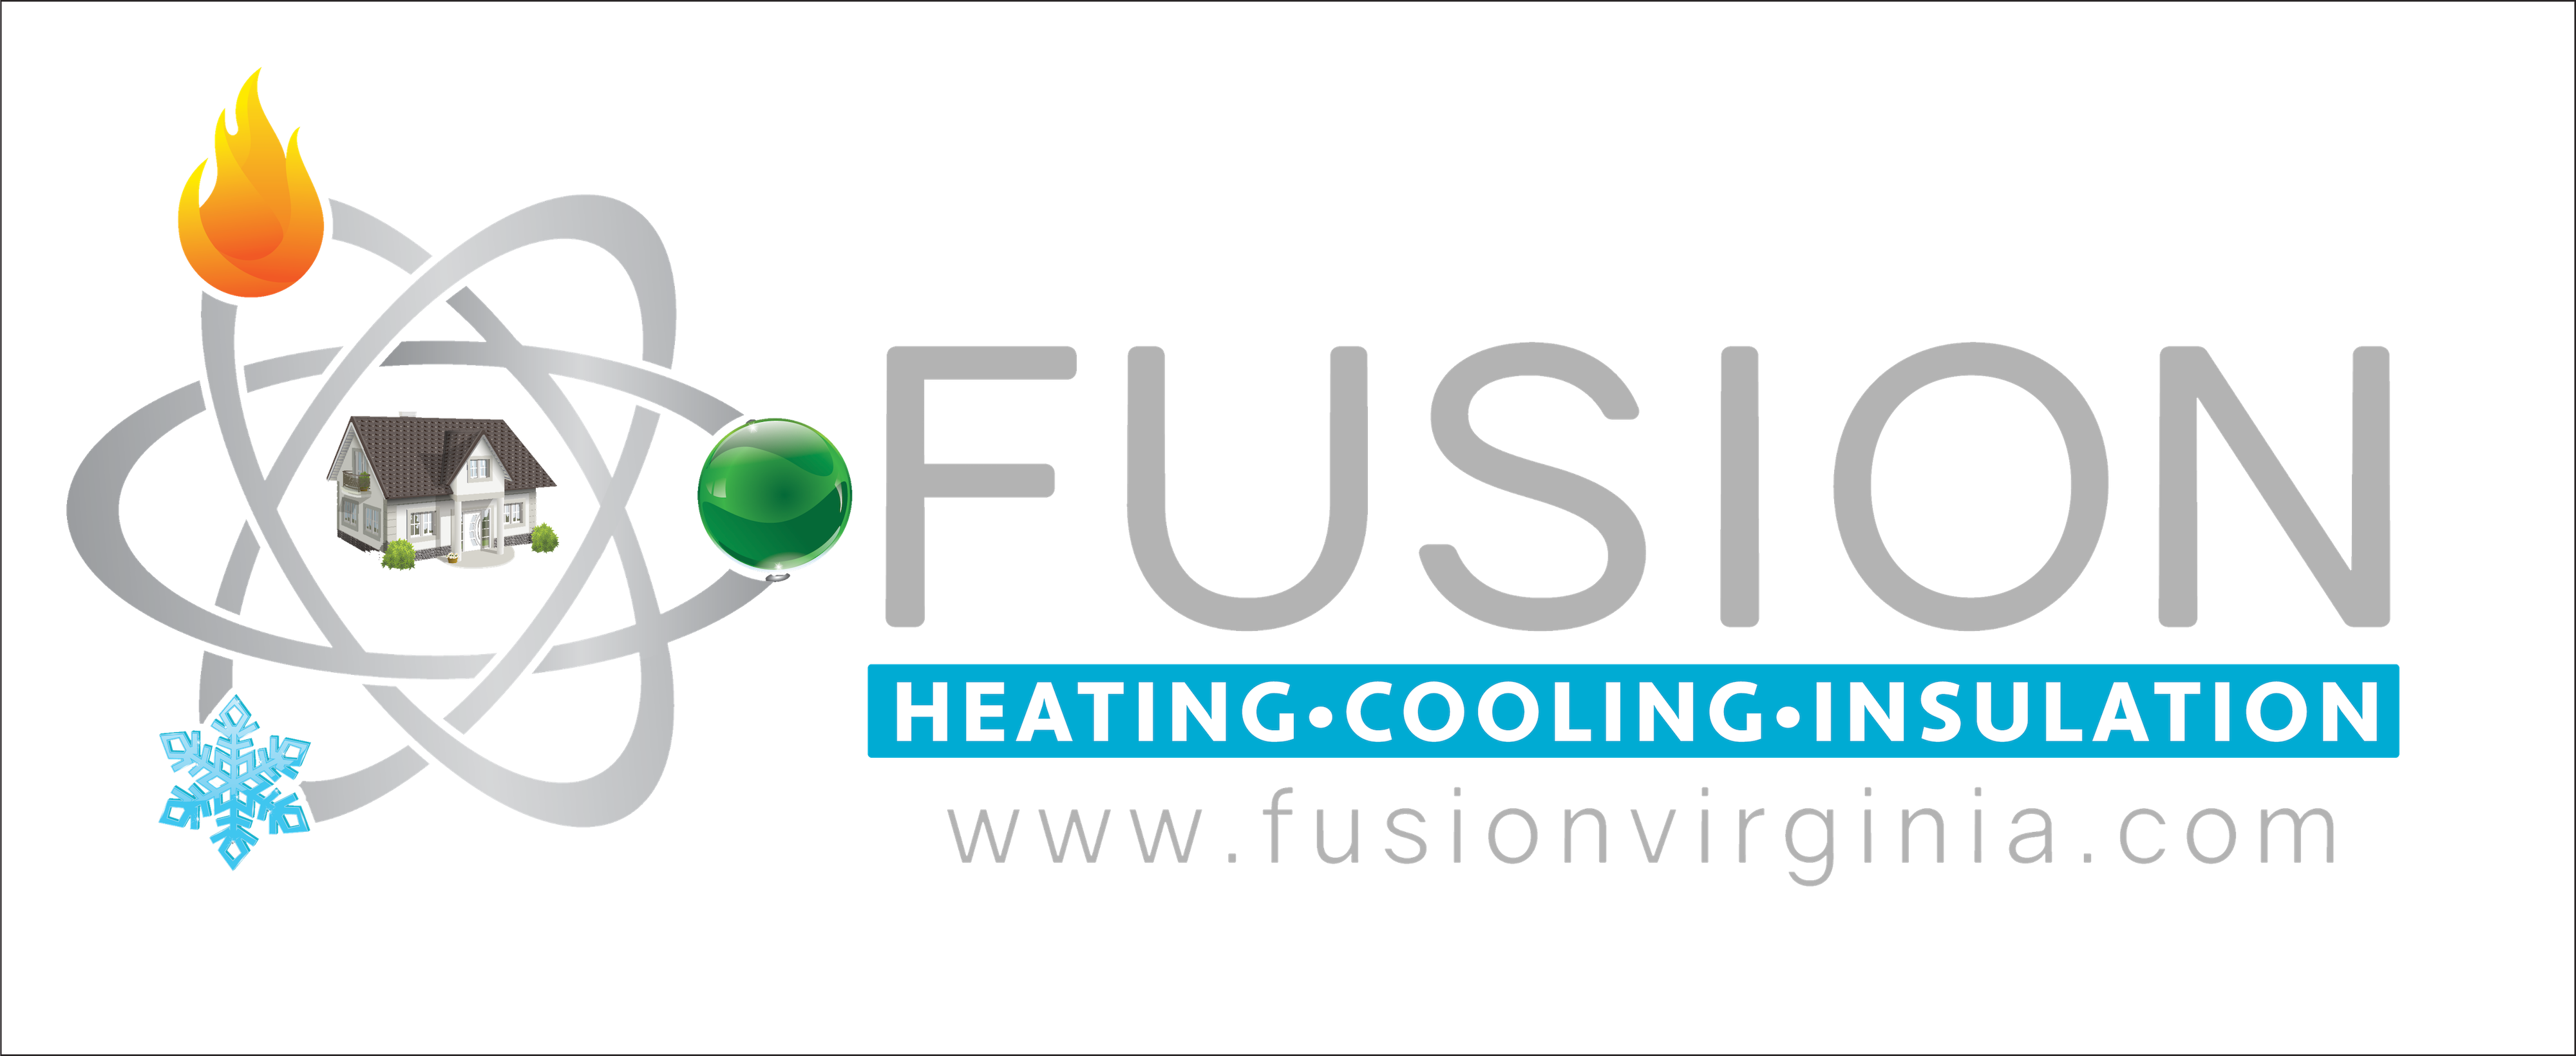 Fusion Heating Air-Conditioning & Insulation Logo